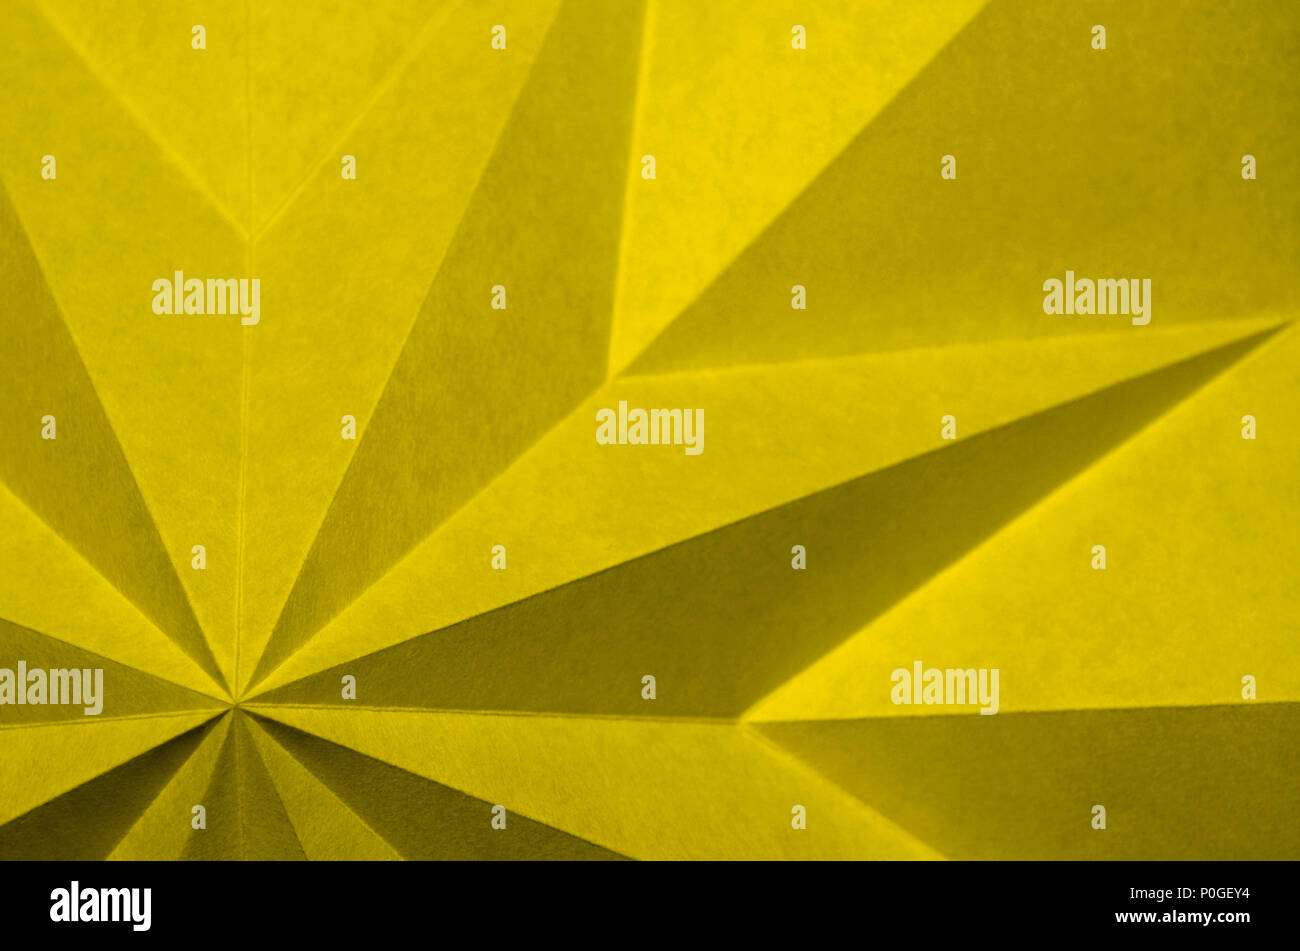 yellow origami abstract background wallpaper. Pantone 13-0646; Meadowlark, Pantone 2018 color of the year compliment. Stock Photo